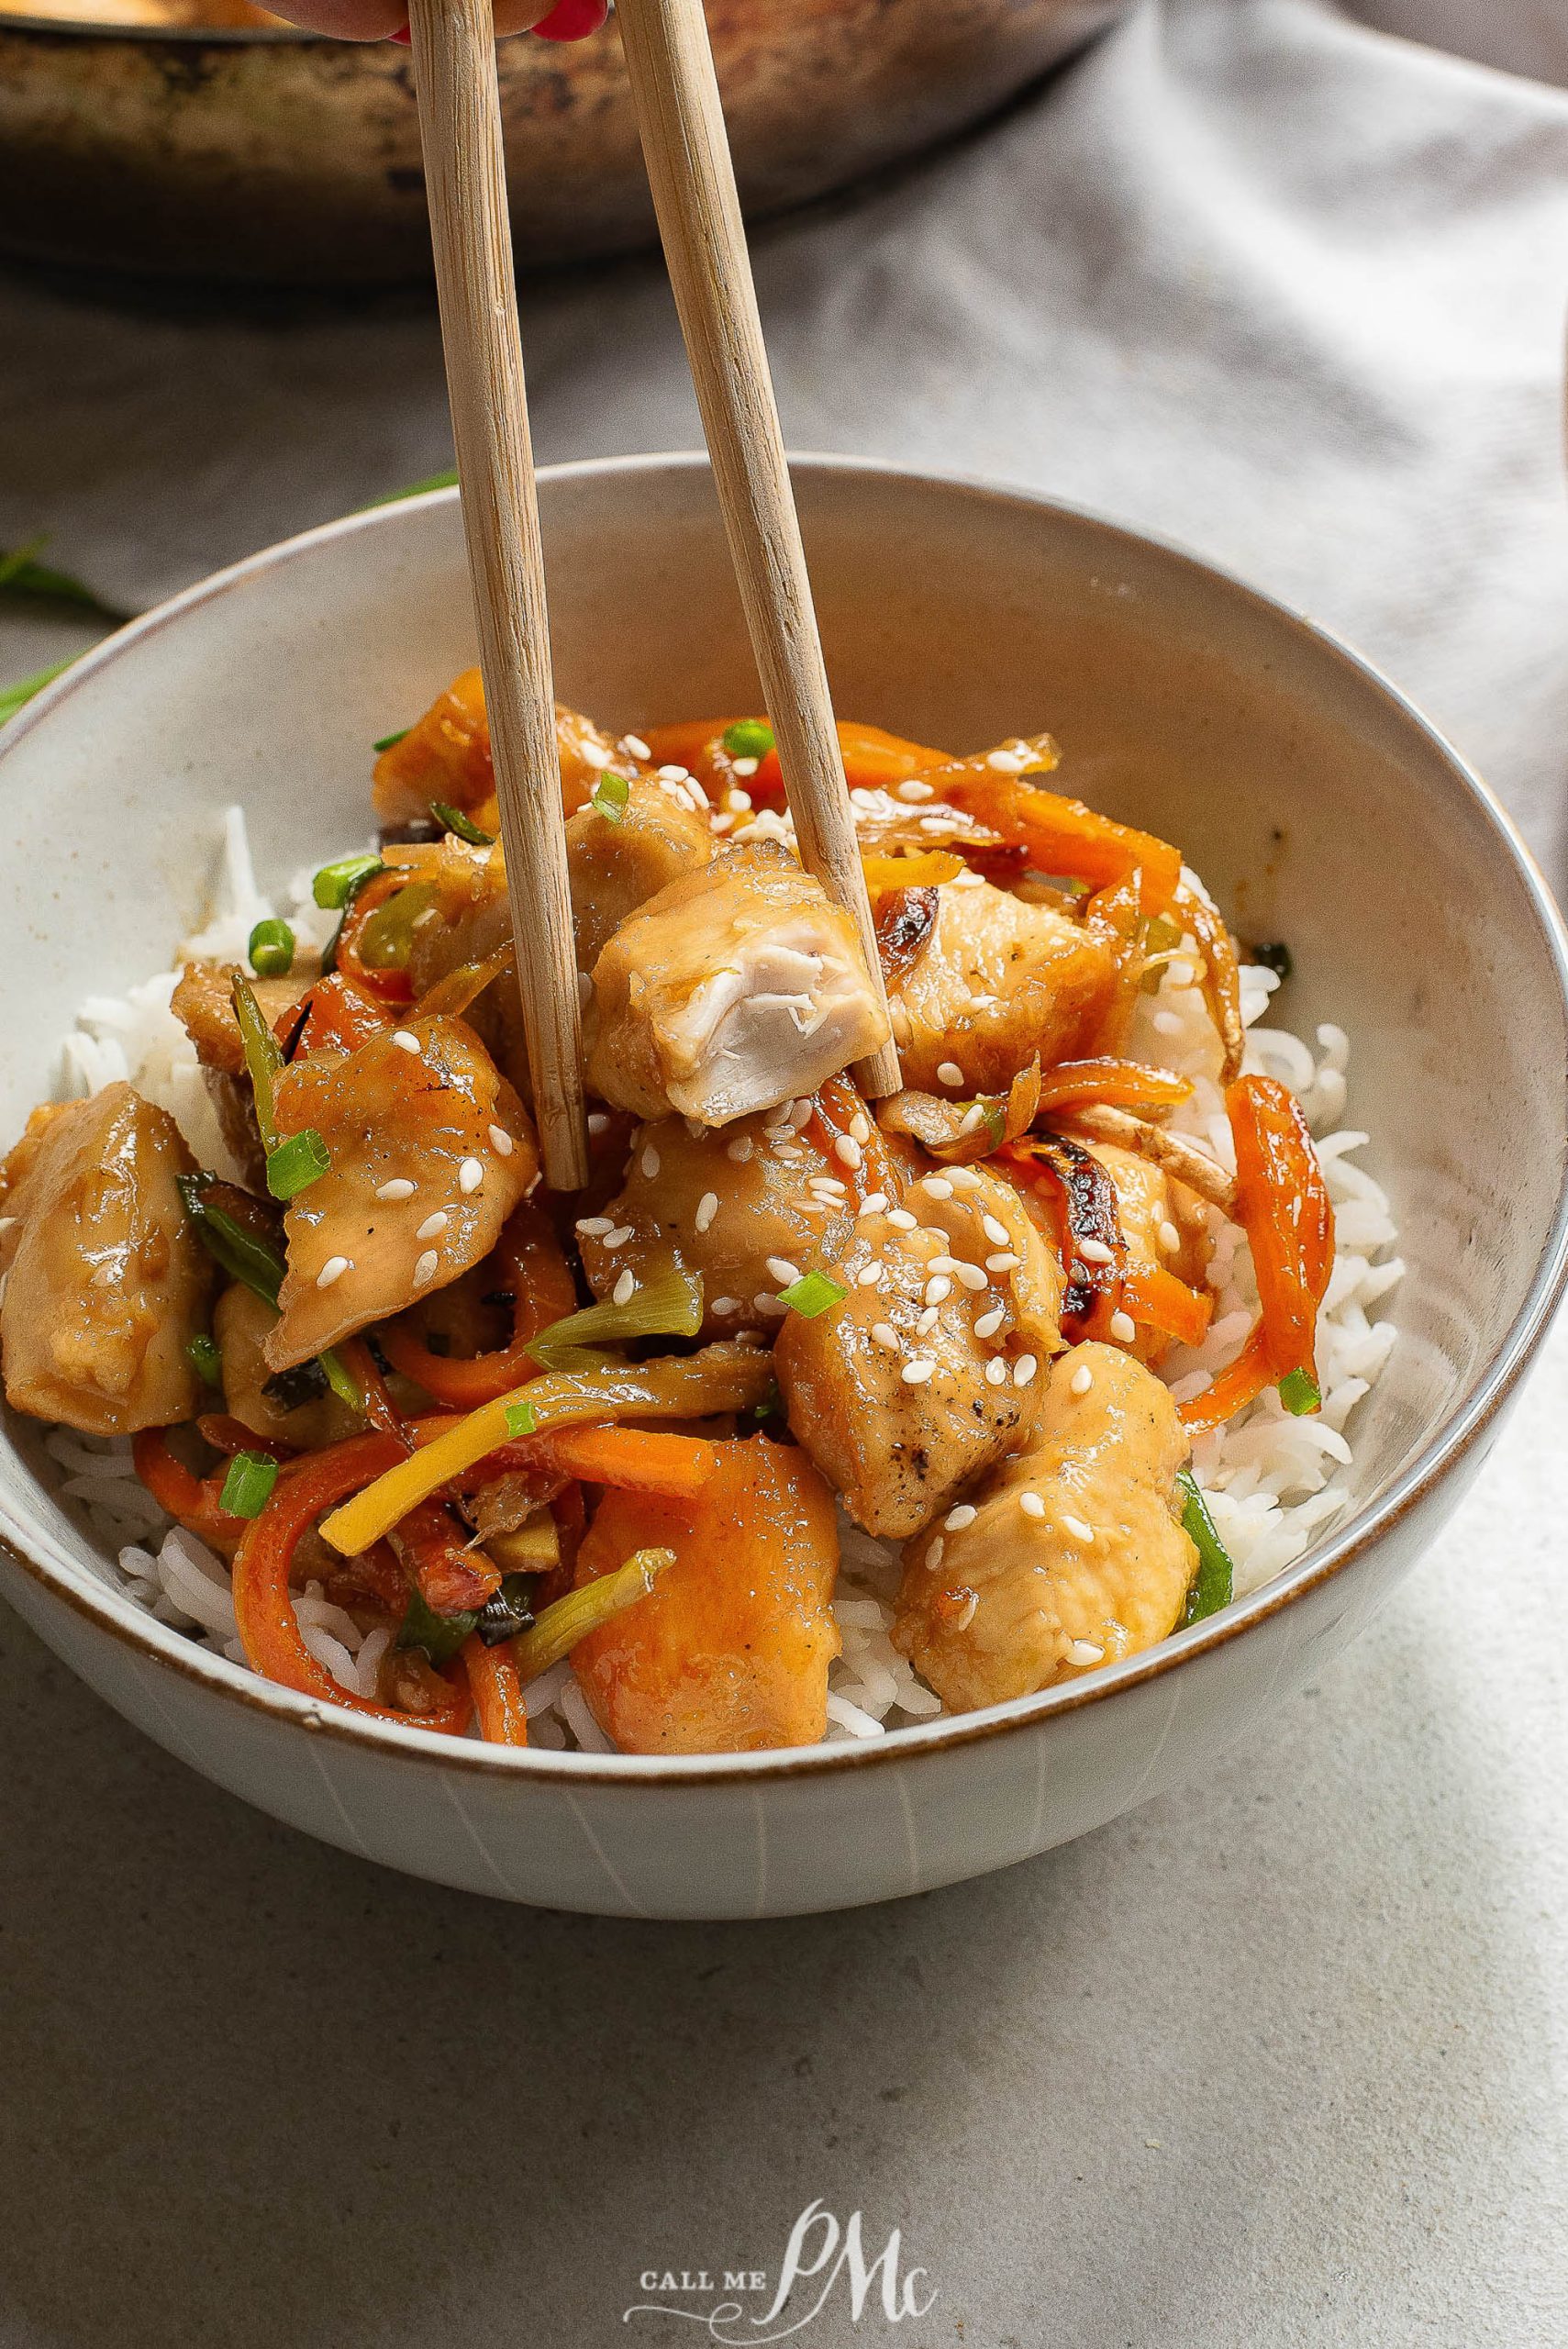 A bowl of Pineapple Chicken and vegetables over rice, garnished with sesame seeds.